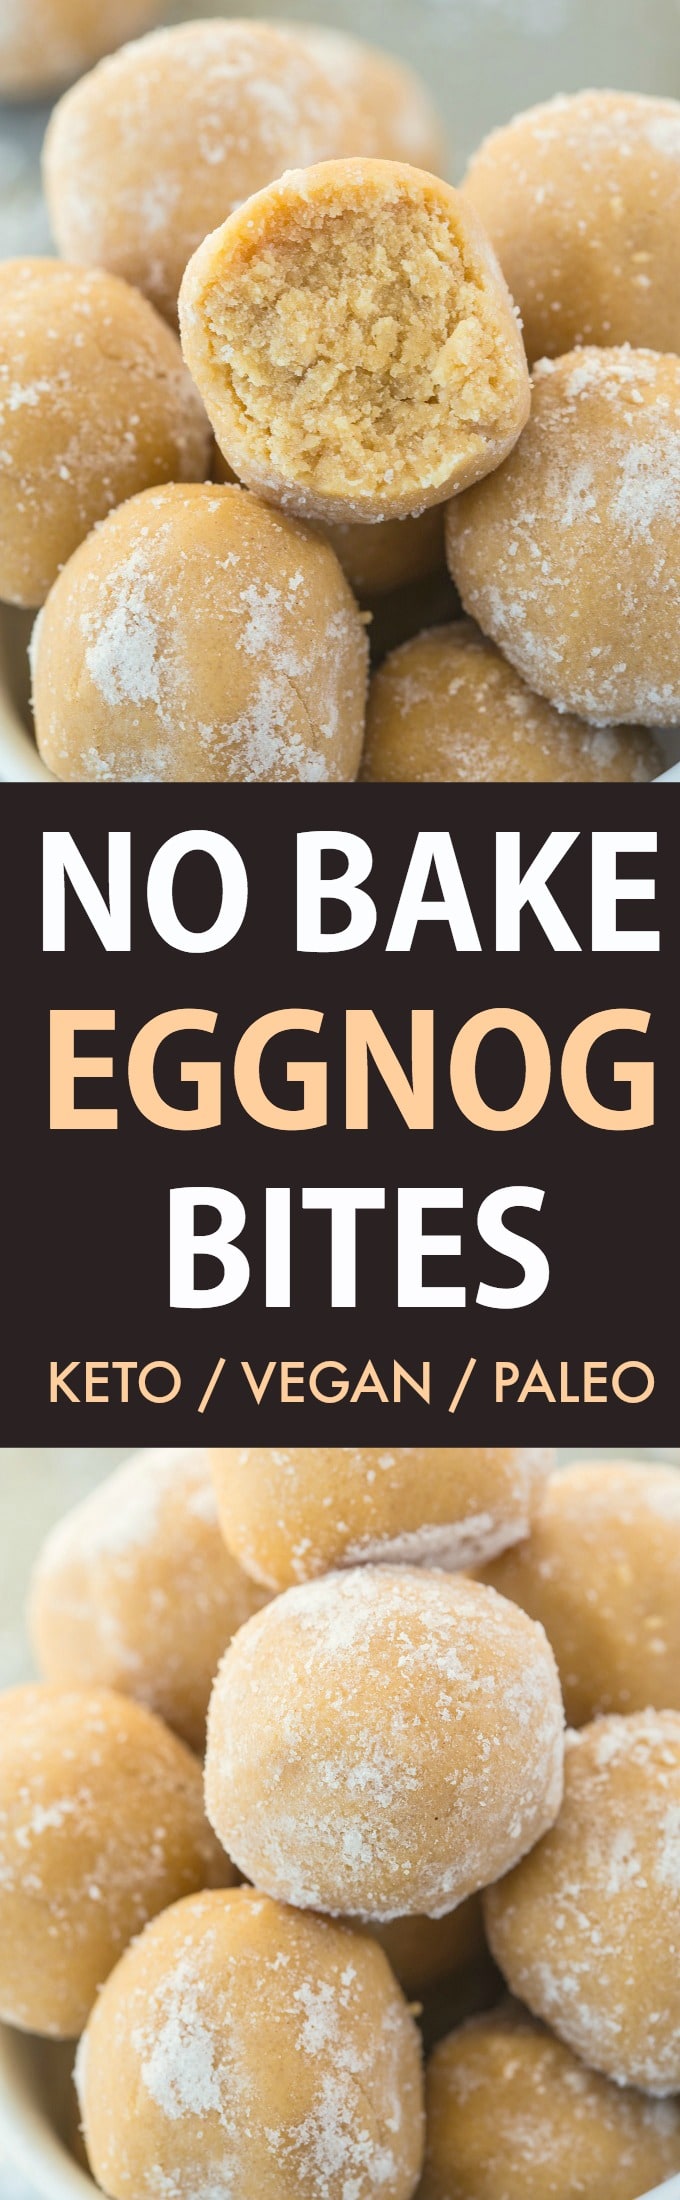 An easy holiday or Christmas recipe for healthy eggnog no bake bites- The perfect dairy-free, protein-packed and sugar-free use for leftover eggnog and the best easy 5-minute eggnog dessert- Paleo, keto, vegan and gluten-free! #eggnog #energybites #christmasrecipes #ketodessert #proteinbites